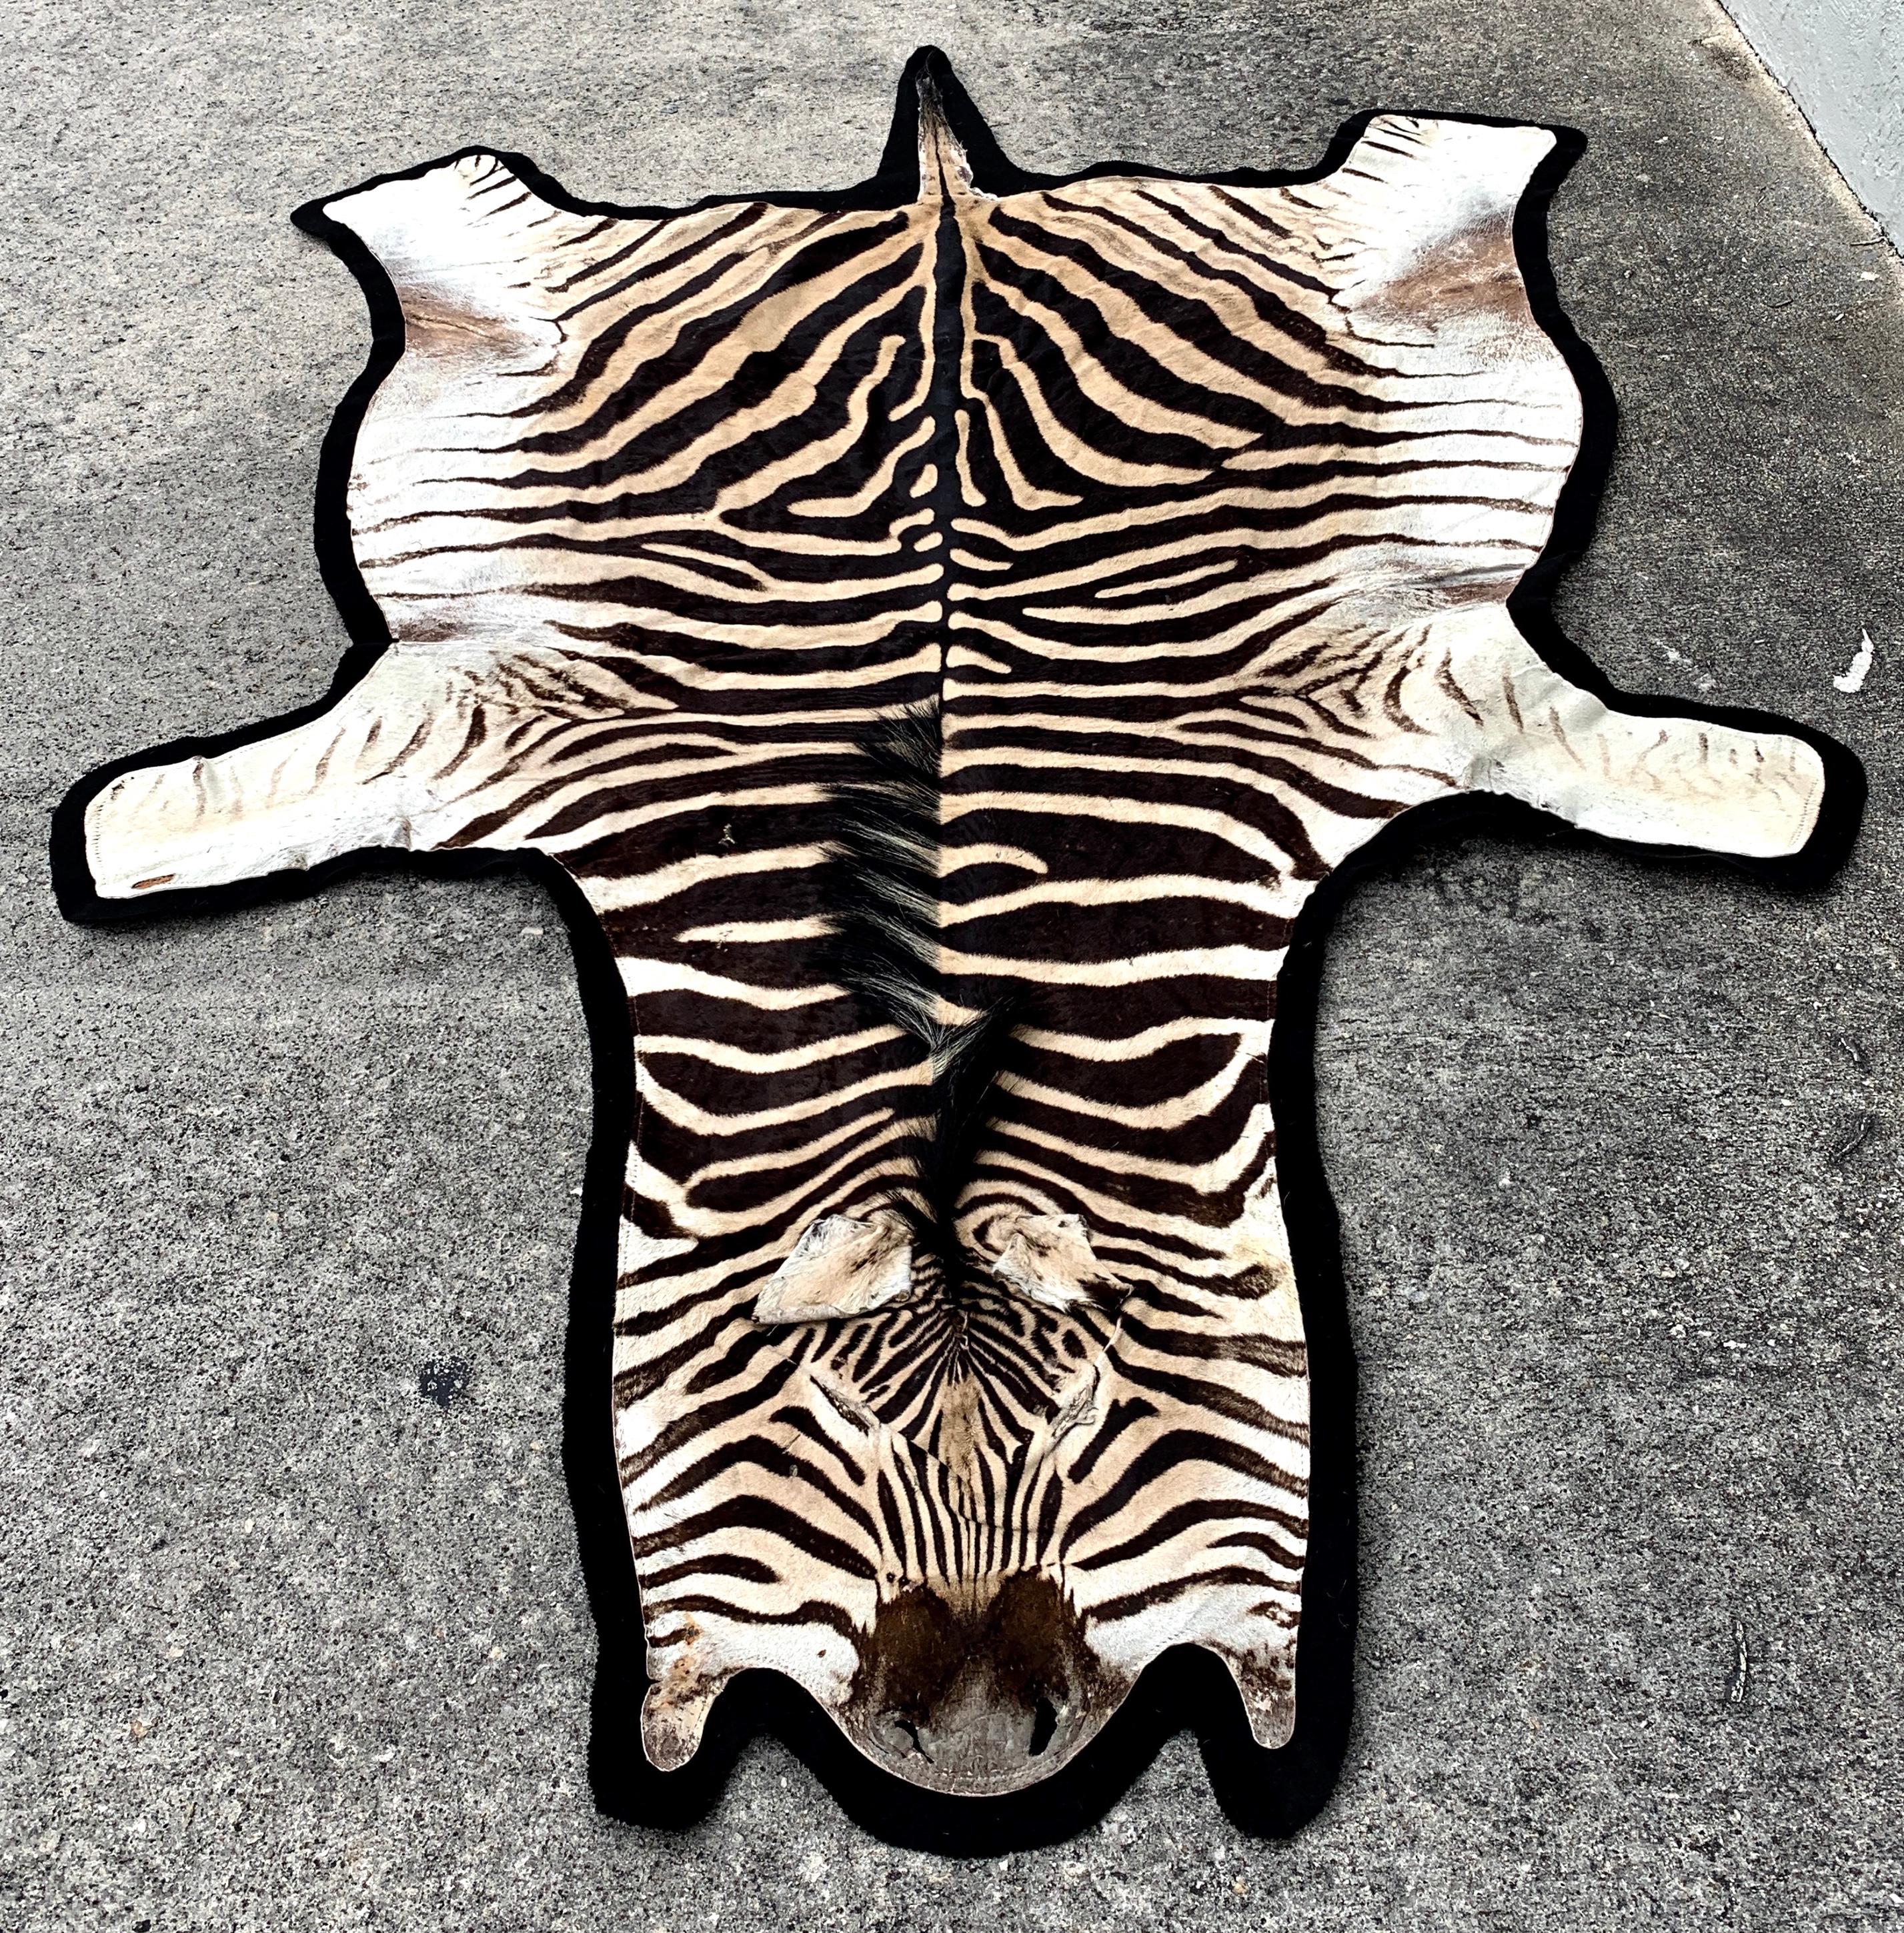 Vintage Zebra Hide rug, newly backed, Exceptional large size 10 feet long x 6 feet wide, 52